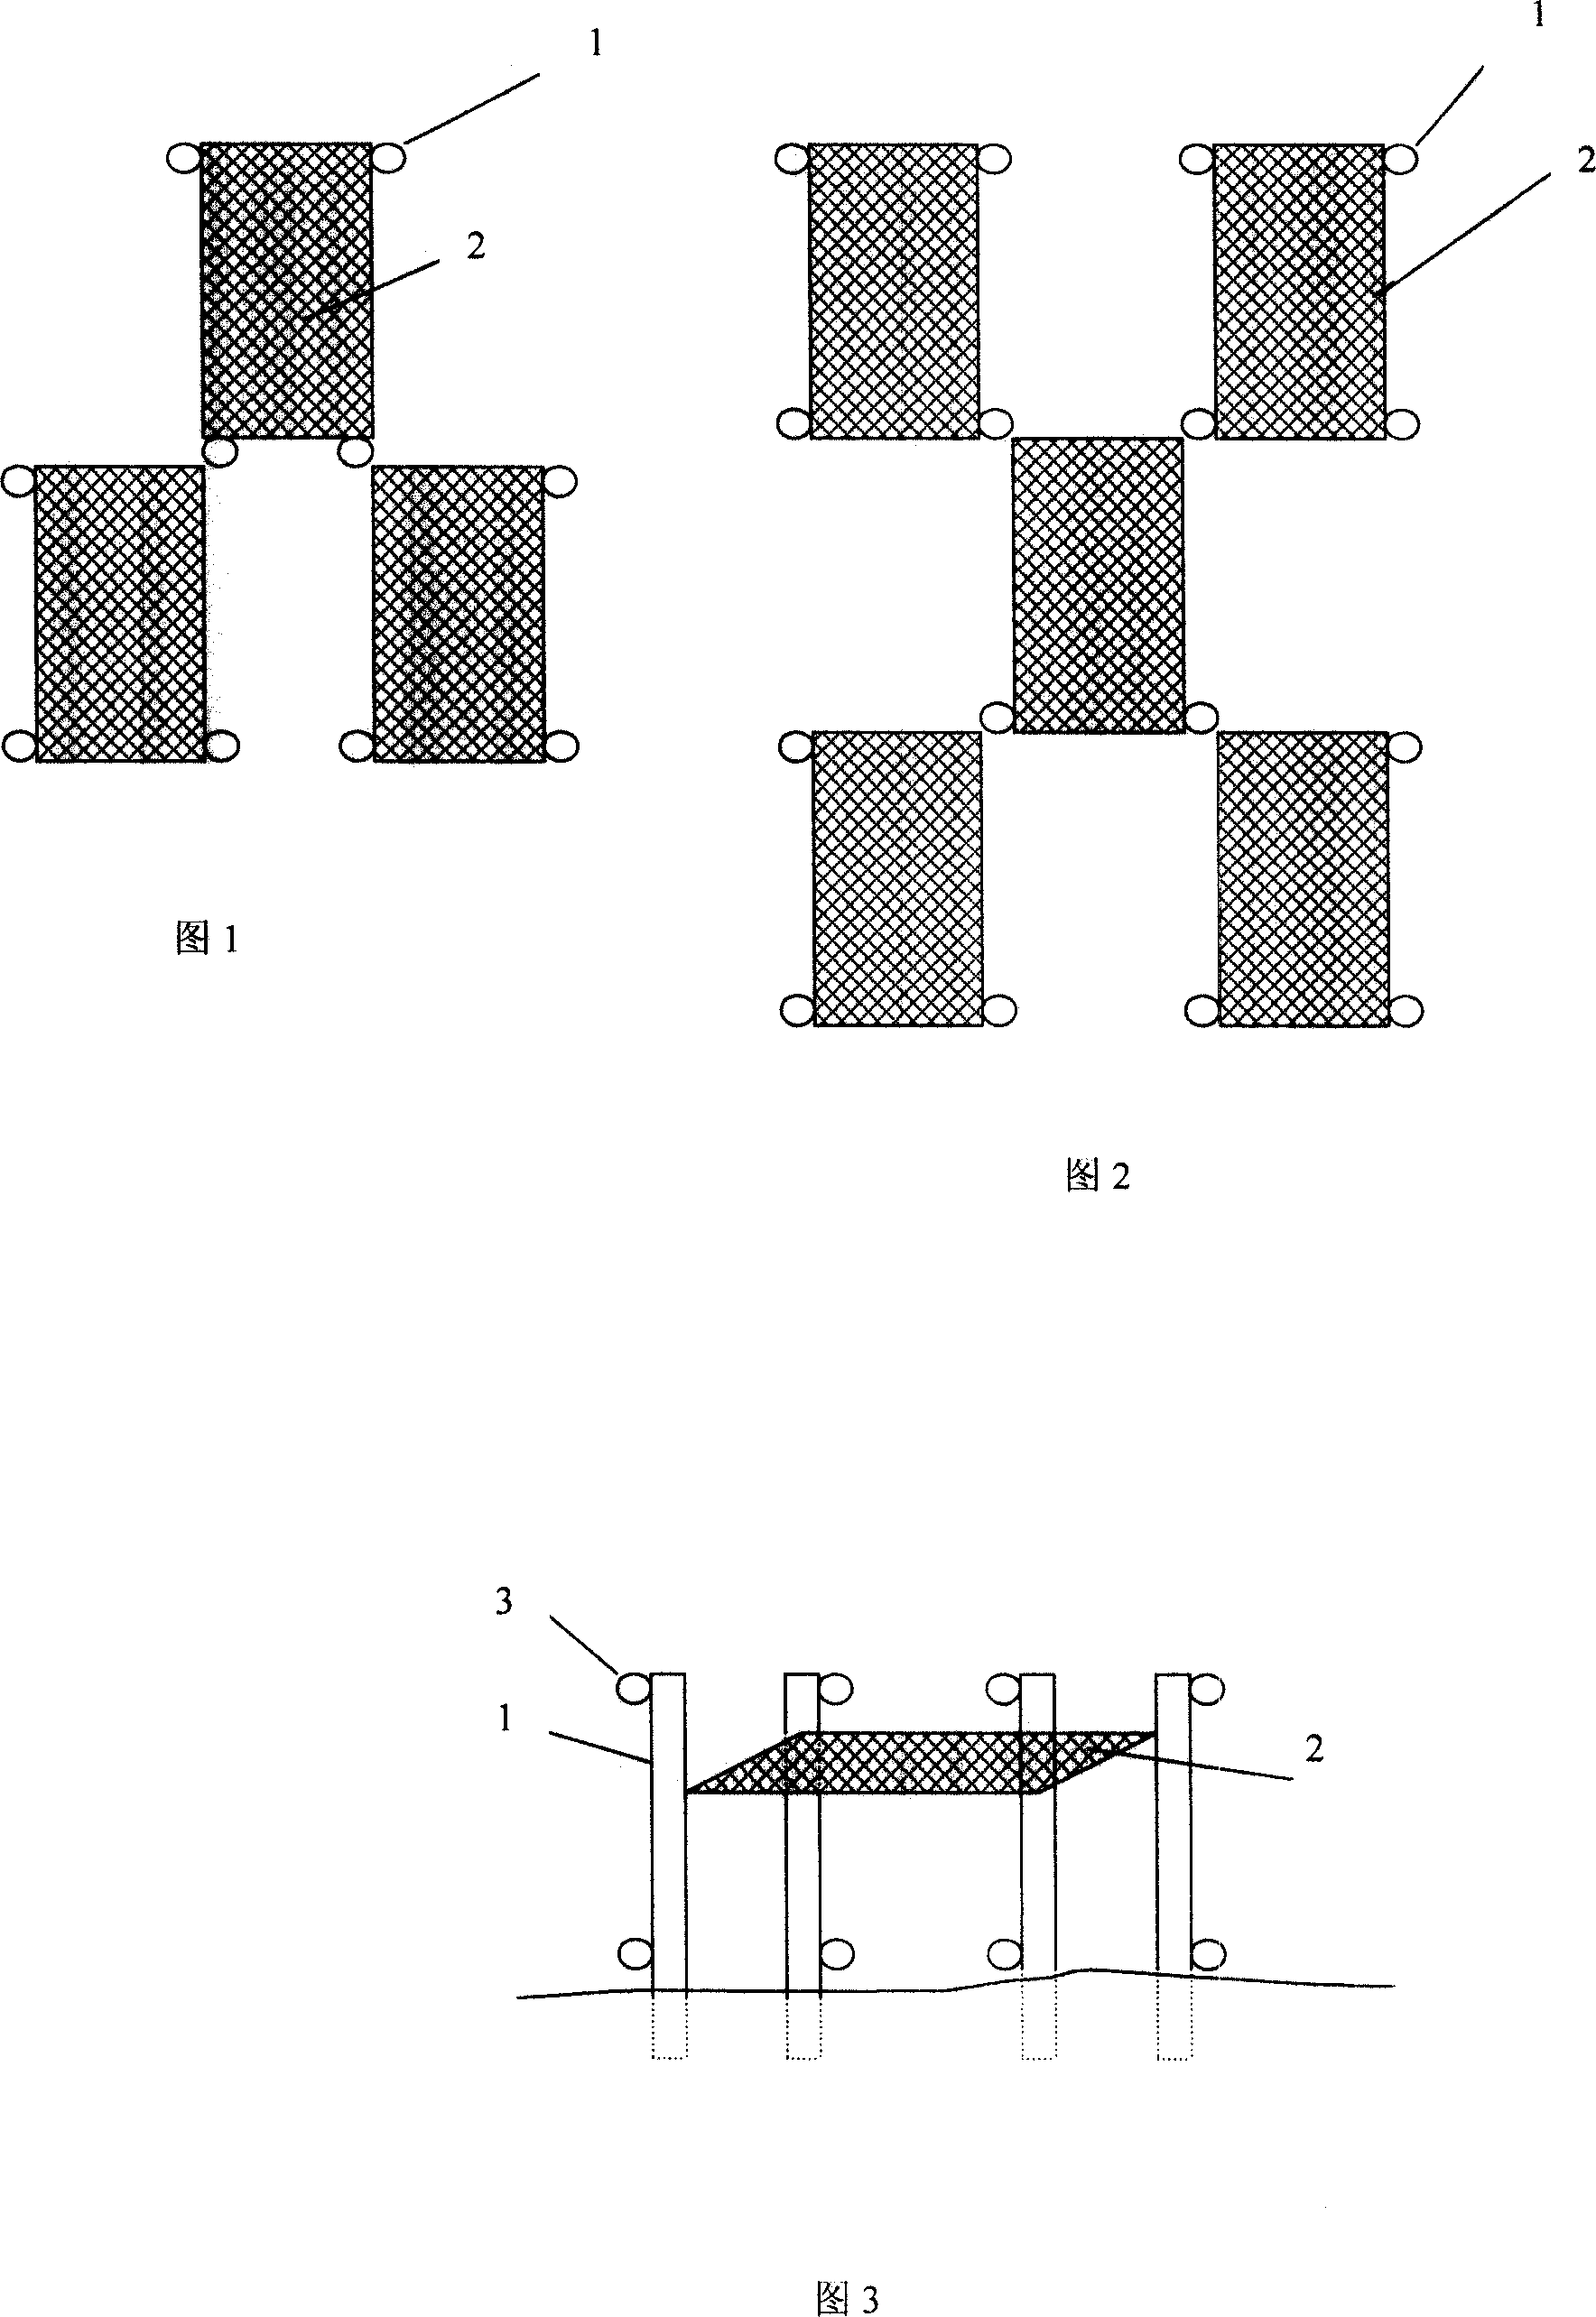 Method for planting submergent plant in lake